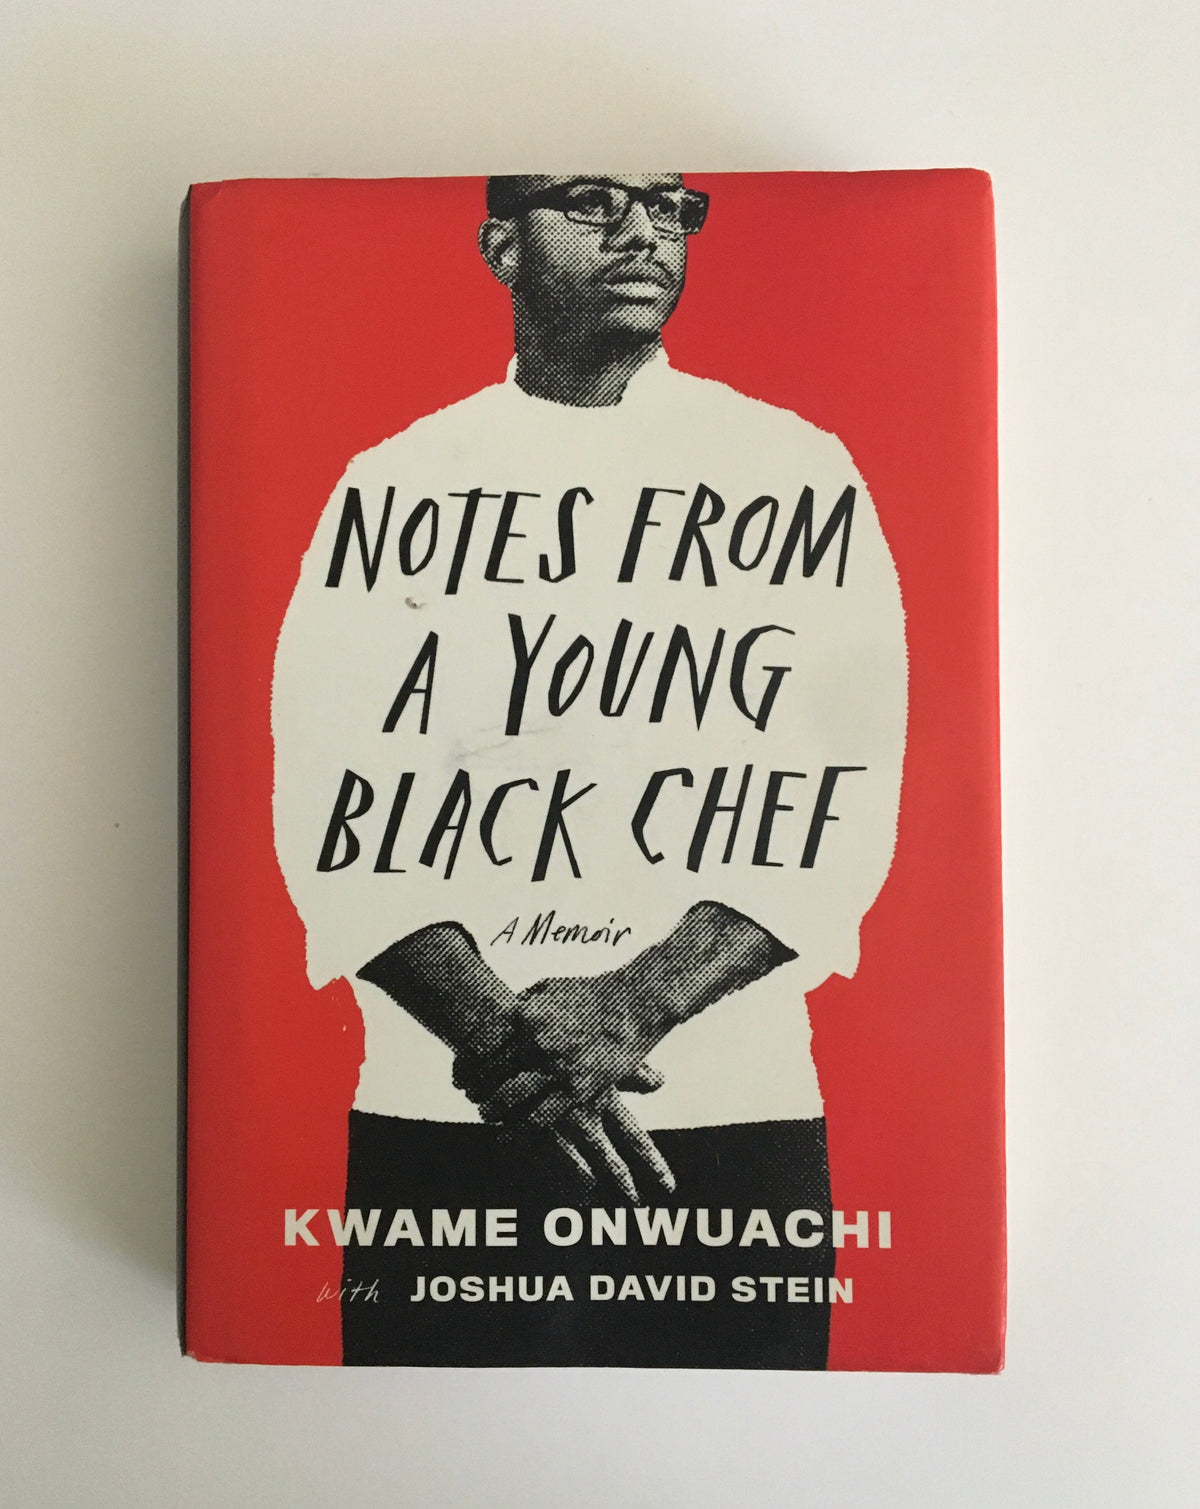 Notes from a Young Black Chef by Kwame Onwuachi